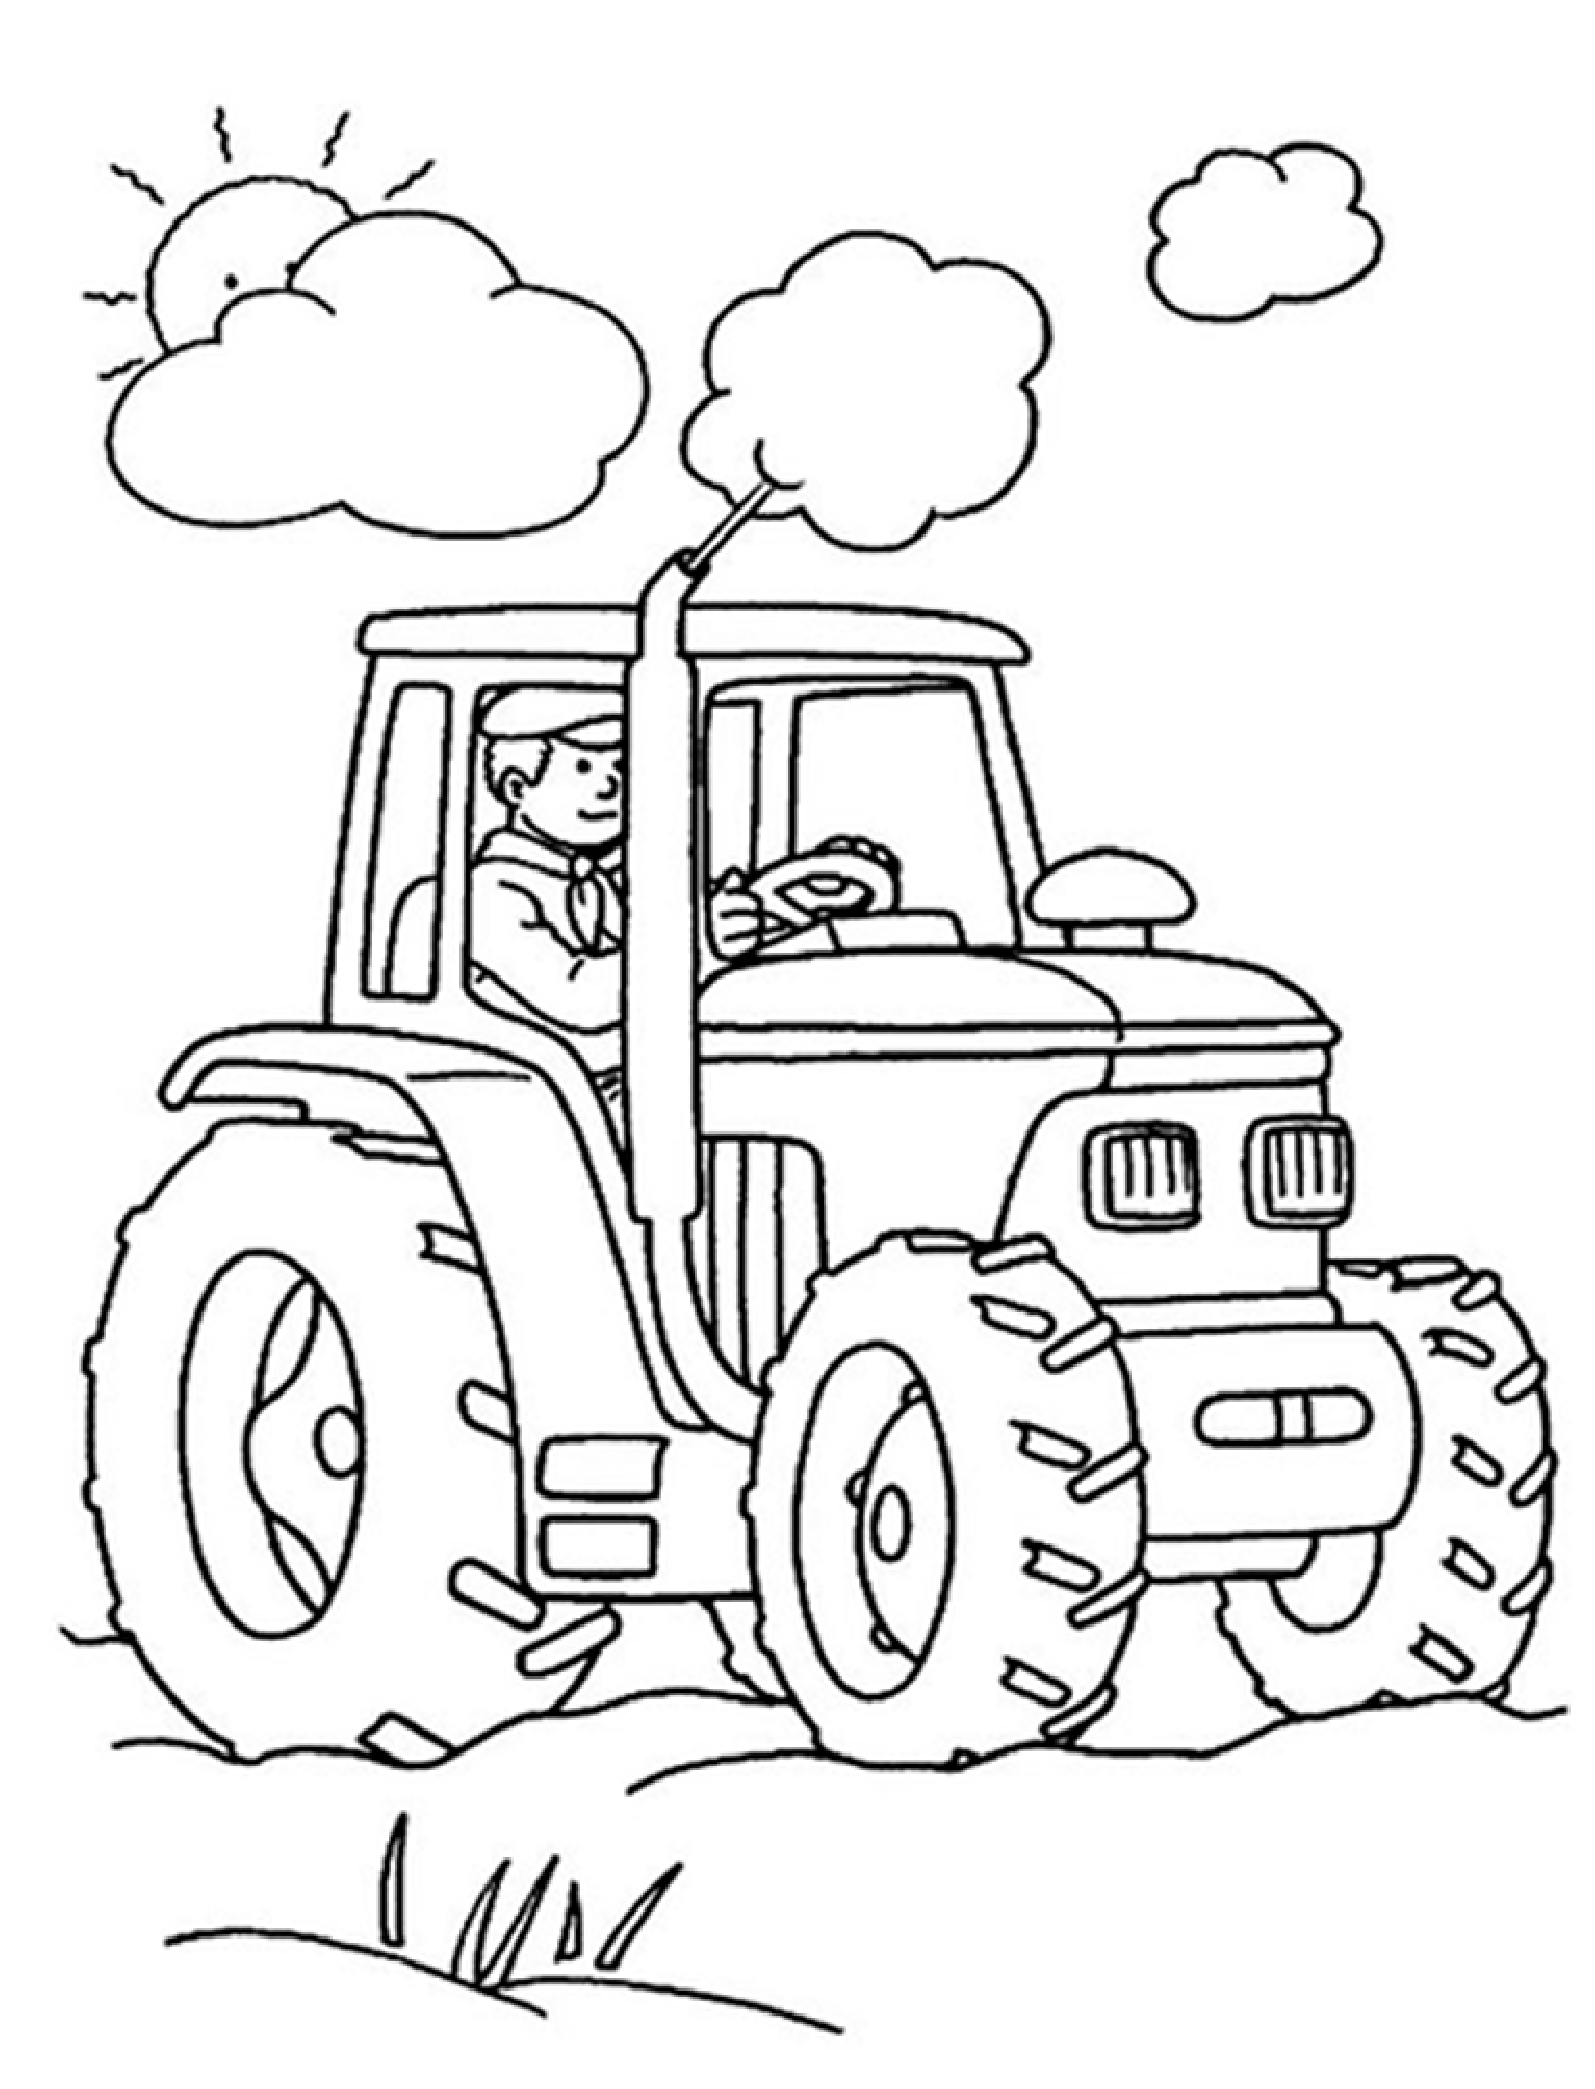 Farm-machinery-Tractor-Coloring-Pages